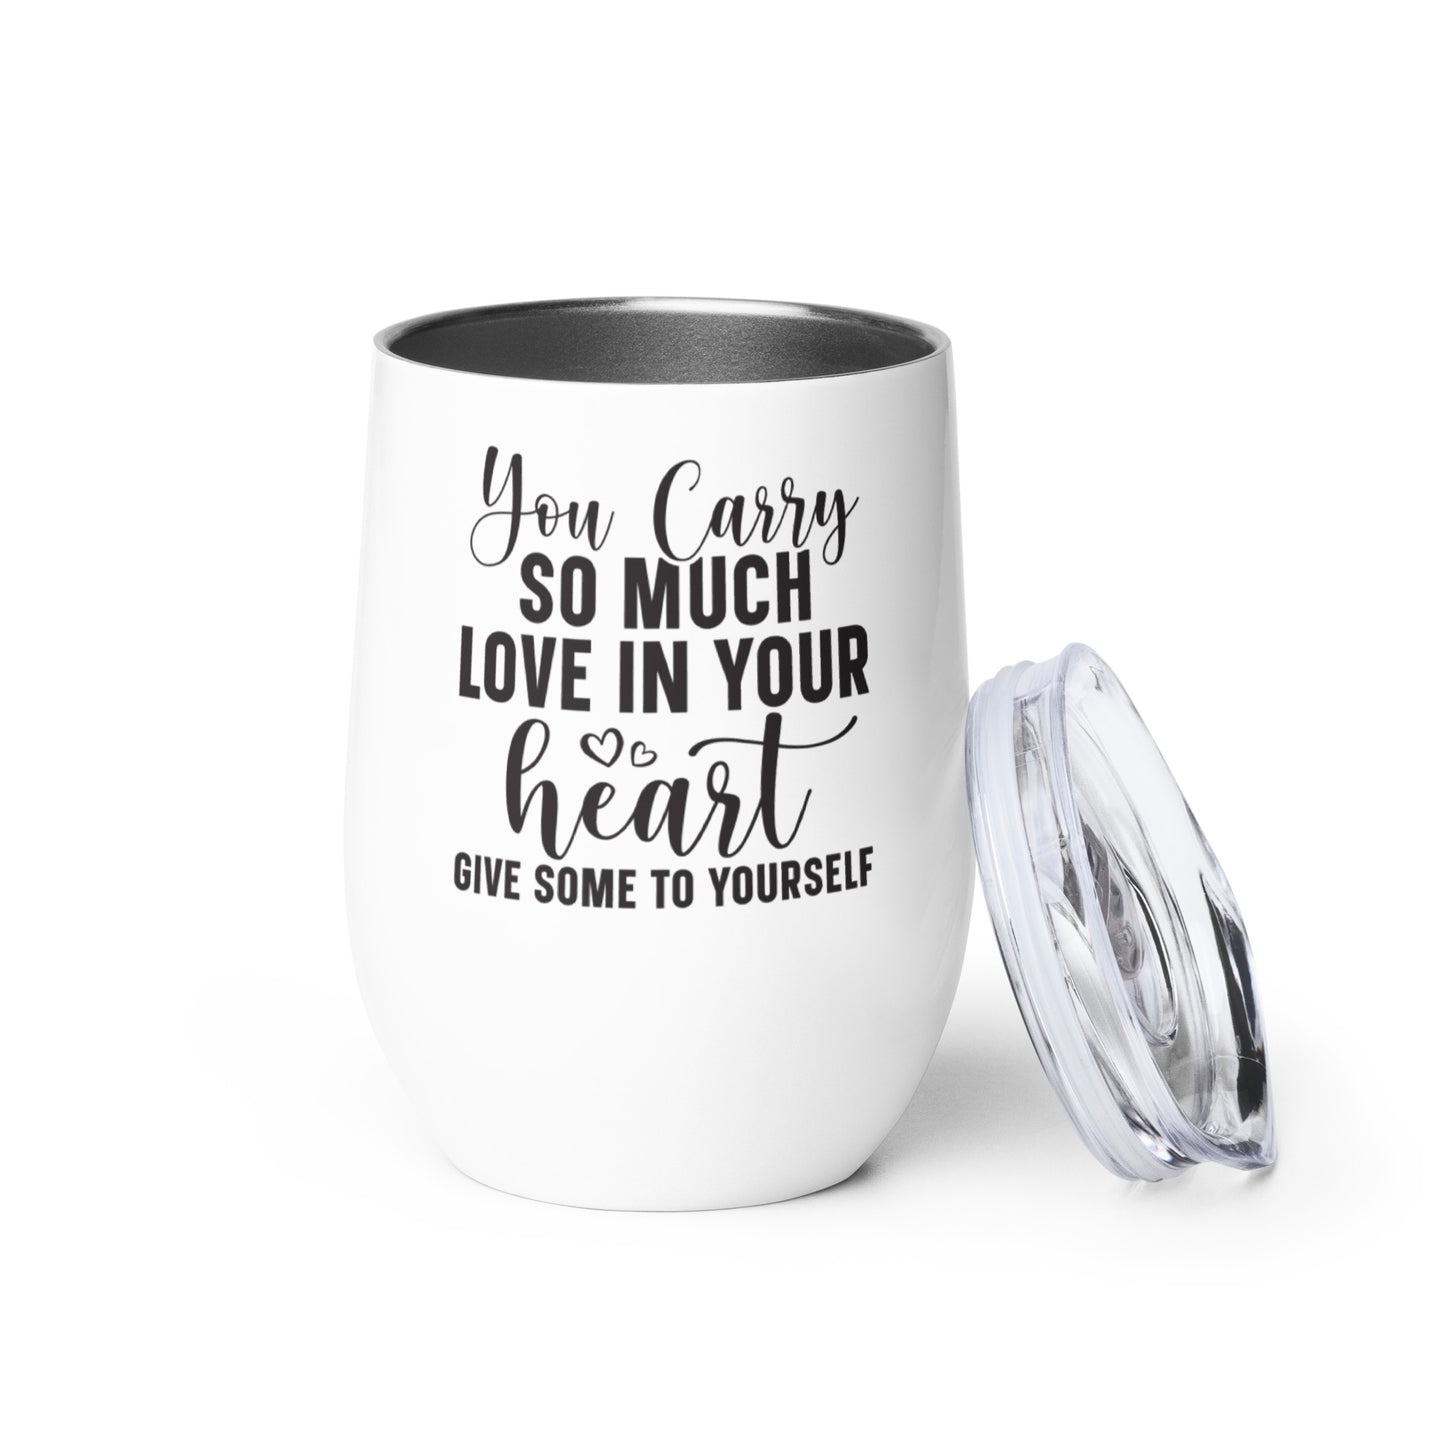 Wine tumbler - You Carry So Much Love in Your Heart Give Some to Yourself